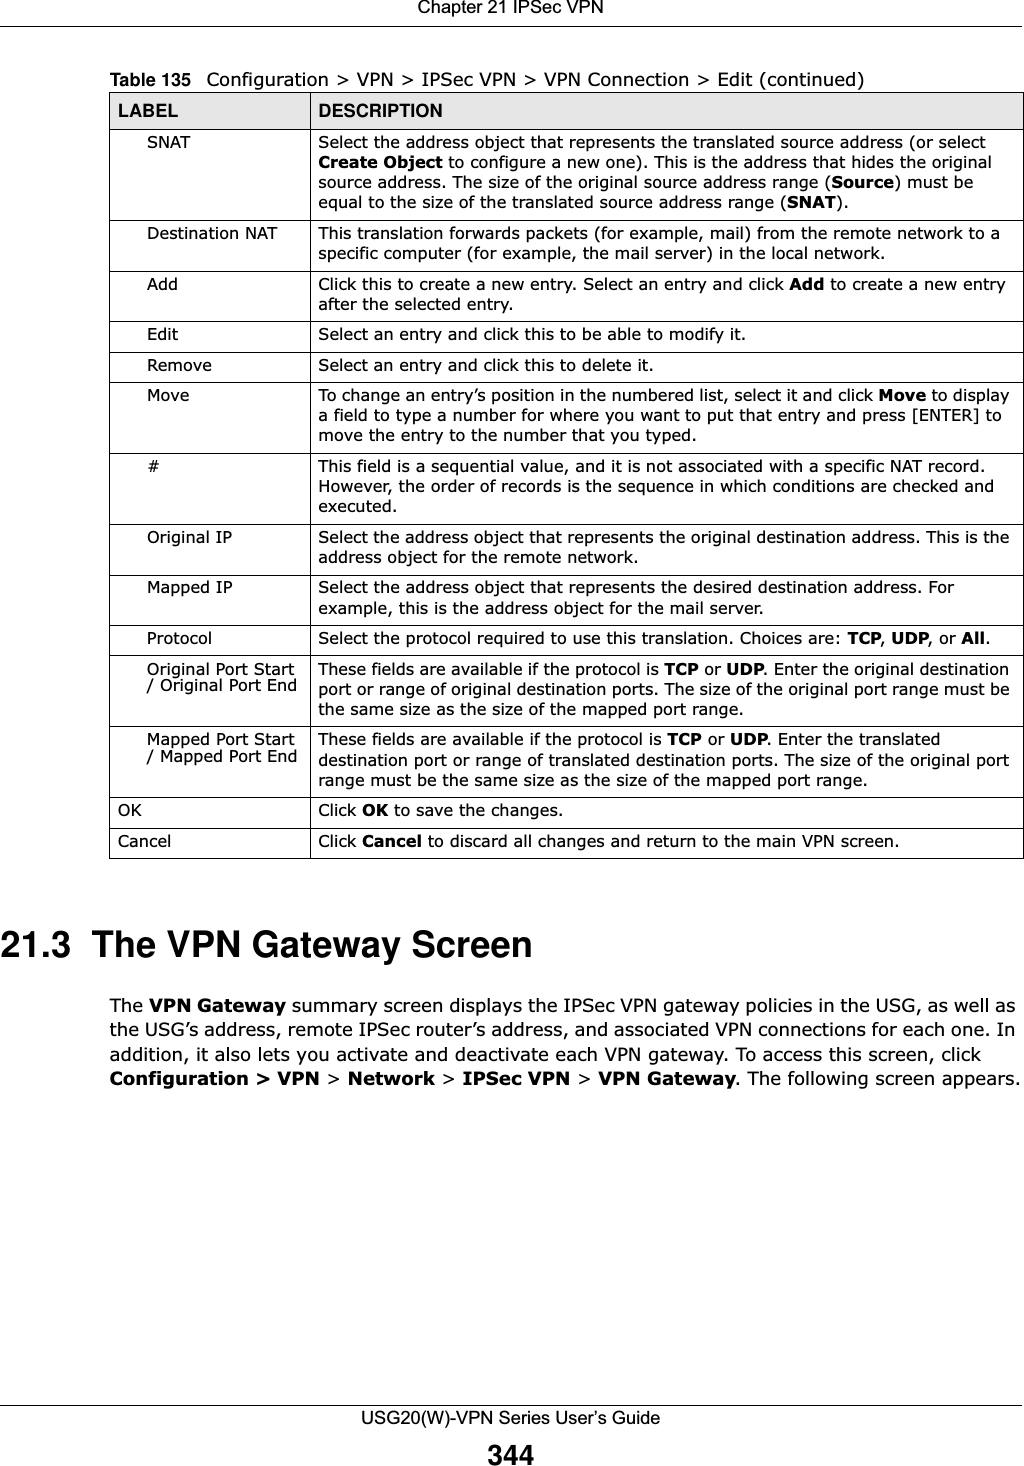 Chapter 21 IPSec VPNUSG20(W)-VPN Series User’s Guide34421.3  The VPN Gateway ScreenThe VPN Gateway summary screen displays the IPSec VPN gateway policies in the USG, as well as the USG’s address, remote IPSec router’s address, and associated VPN connections for each one. In addition, it also lets you activate and deactivate each VPN gateway. To access this screen, click Configuration &gt; VPN &gt; Network &gt; IPSec VPN &gt; VPN Gateway. The following screen appears.SNAT Select the address object that represents the translated source address (or select Create Object to configure a new one). This is the address that hides the original source address. The size of the original source address range (Source) must be equal to the size of the translated source address range (SNAT).Destination NAT This translation forwards packets (for example, mail) from the remote network to a specific computer (for example, the mail server) in the local network.Add Click this to create a new entry. Select an entry and click Add to create a new entry after the selected entry.Edit Select an entry and click this to be able to modify it. Remove Select an entry and click this to delete it. Move To change an entry’s position in the numbered list, select it and click Move to display a field to type a number for where you want to put that entry and press [ENTER] to move the entry to the number that you typed.# This field is a sequential value, and it is not associated with a specific NAT record. However, the order of records is the sequence in which conditions are checked and executed.Original IP Select the address object that represents the original destination address. This is the address object for the remote network.Mapped IP Select the address object that represents the desired destination address. For example, this is the address object for the mail server.Protocol Select the protocol required to use this translation. Choices are: TCP, UDP, or All.Original Port Start / Original Port End These fields are available if the protocol is TCP or UDP. Enter the original destination port or range of original destination ports. The size of the original port range must be the same size as the size of the mapped port range.Mapped Port Start / Mapped Port End These fields are available if the protocol is TCP or UDP. Enter the translated destination port or range of translated destination ports. The size of the original port range must be the same size as the size of the mapped port range.OK Click OK to save the changes. Cancel Click Cancel to discard all changes and return to the main VPN screen. Table 135   Configuration &gt; VPN &gt; IPSec VPN &gt; VPN Connection &gt; Edit (continued)LABEL DESCRIPTION